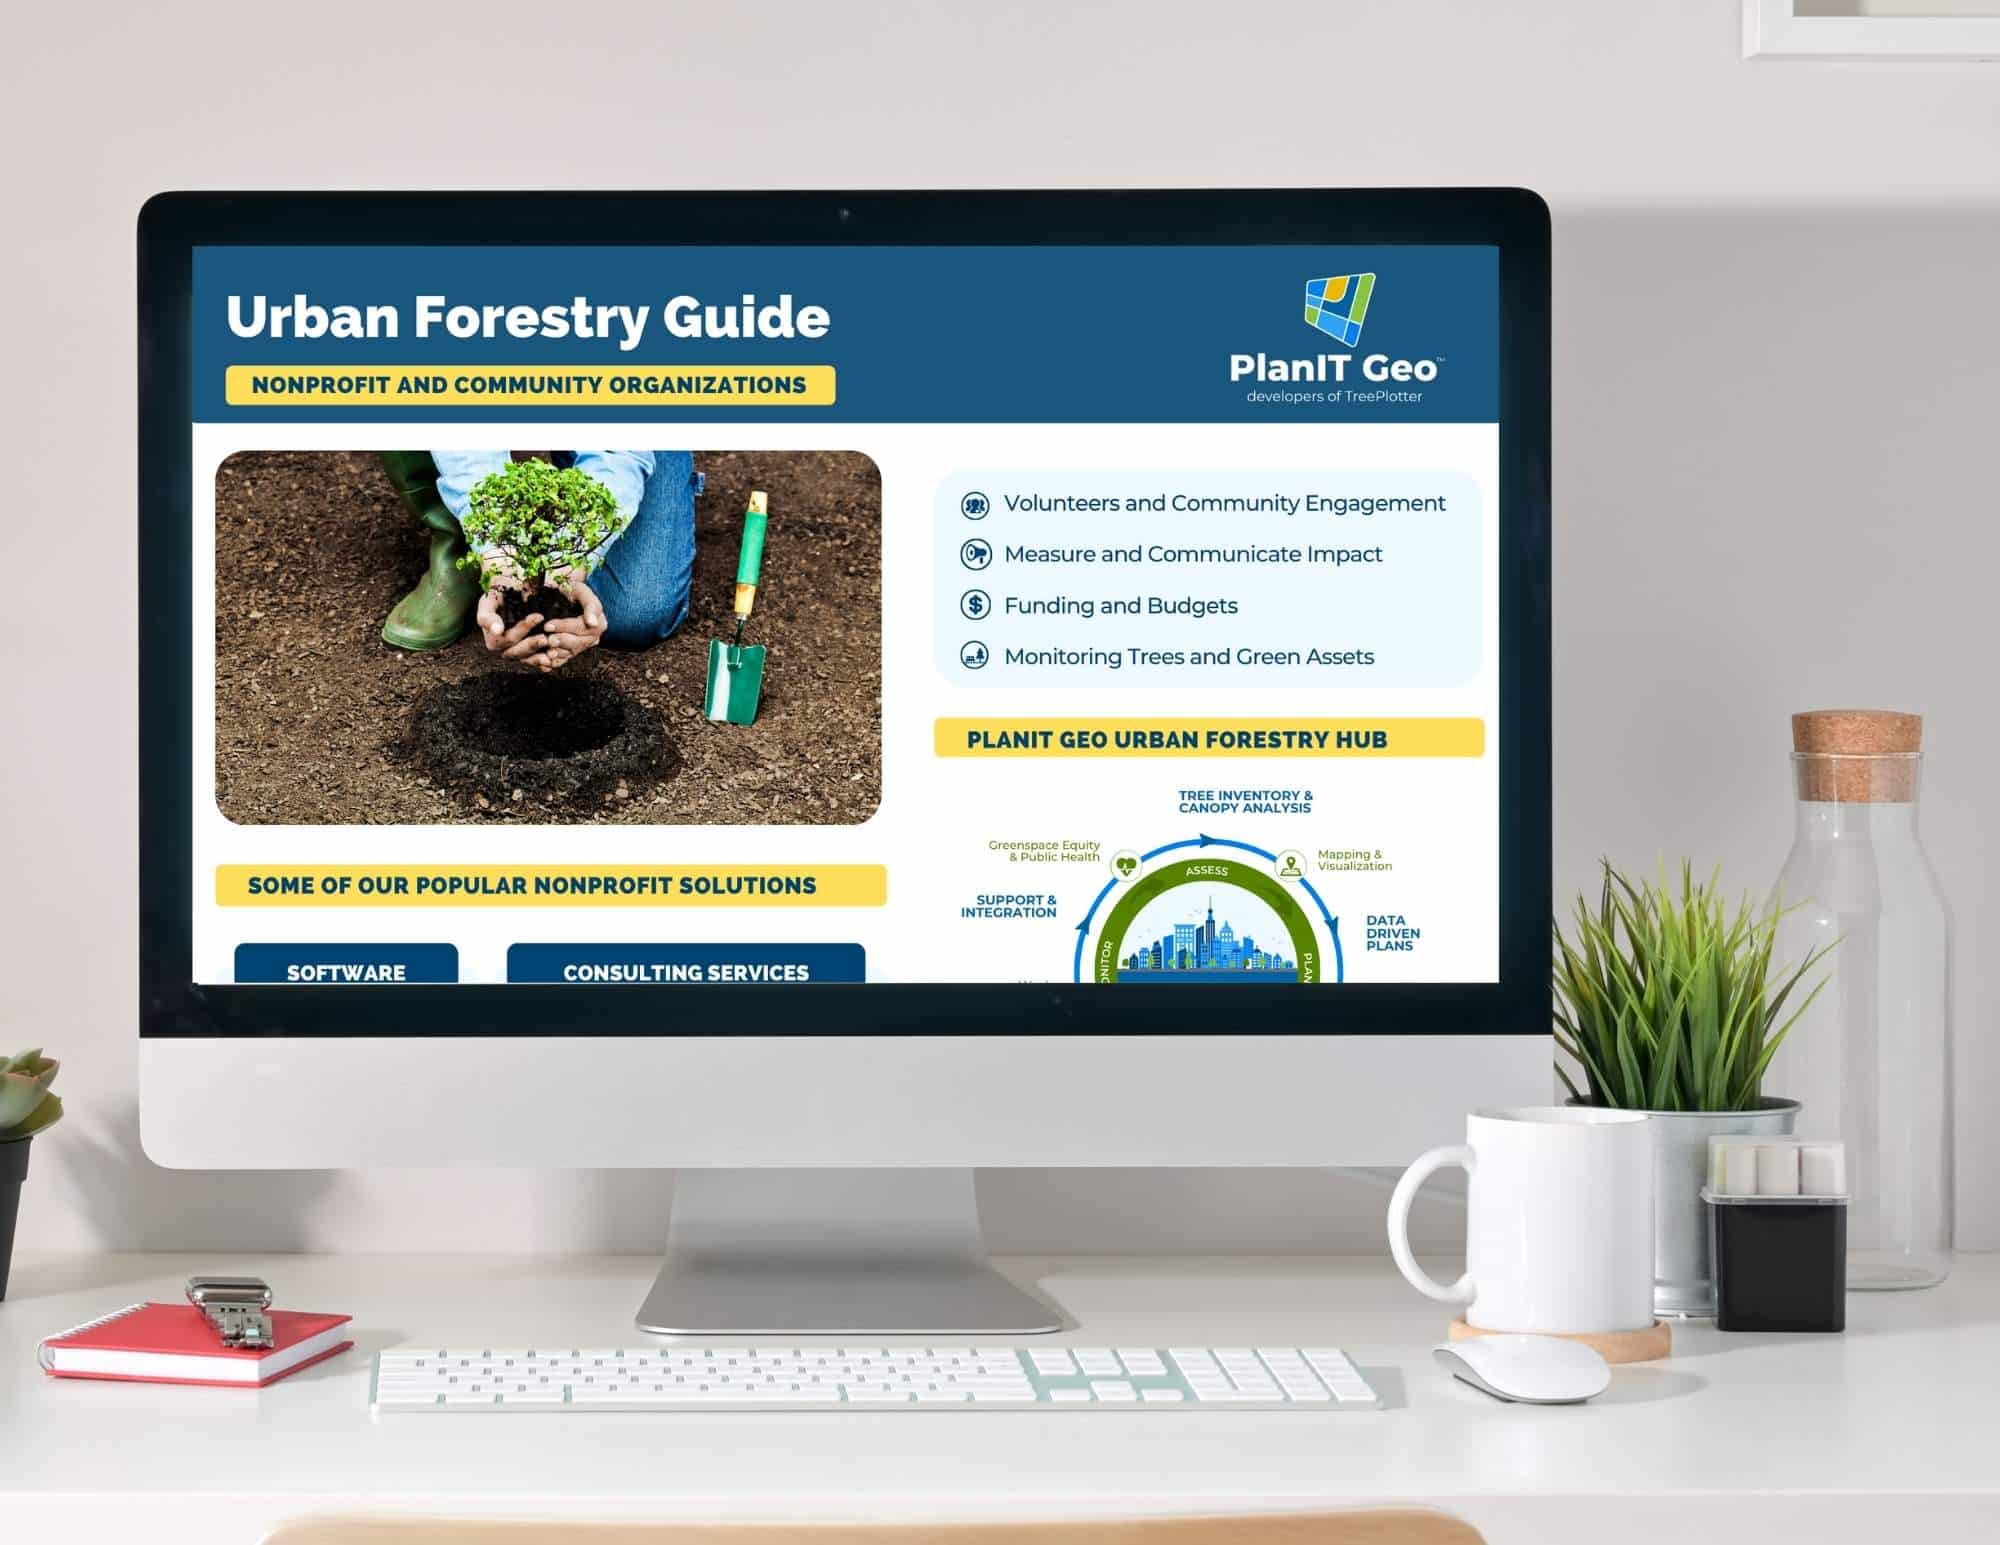 Urban Forestry guide for nonprofit and community groups from PlanIT Geo